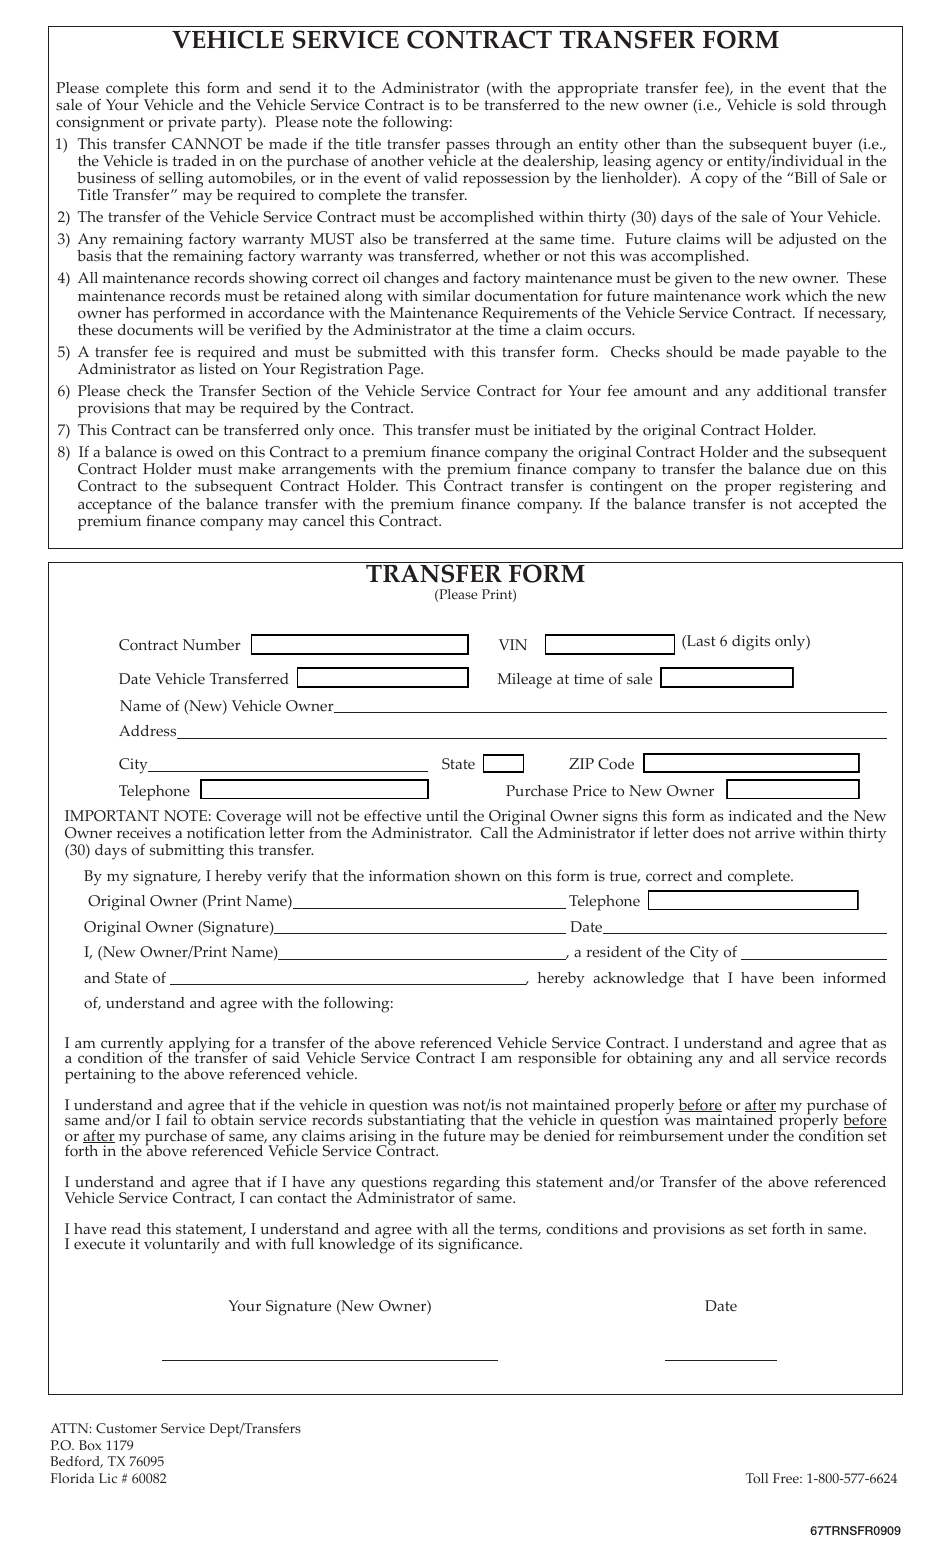 Vehicle Service Contract Transfer Form - Warrantech, Page 1